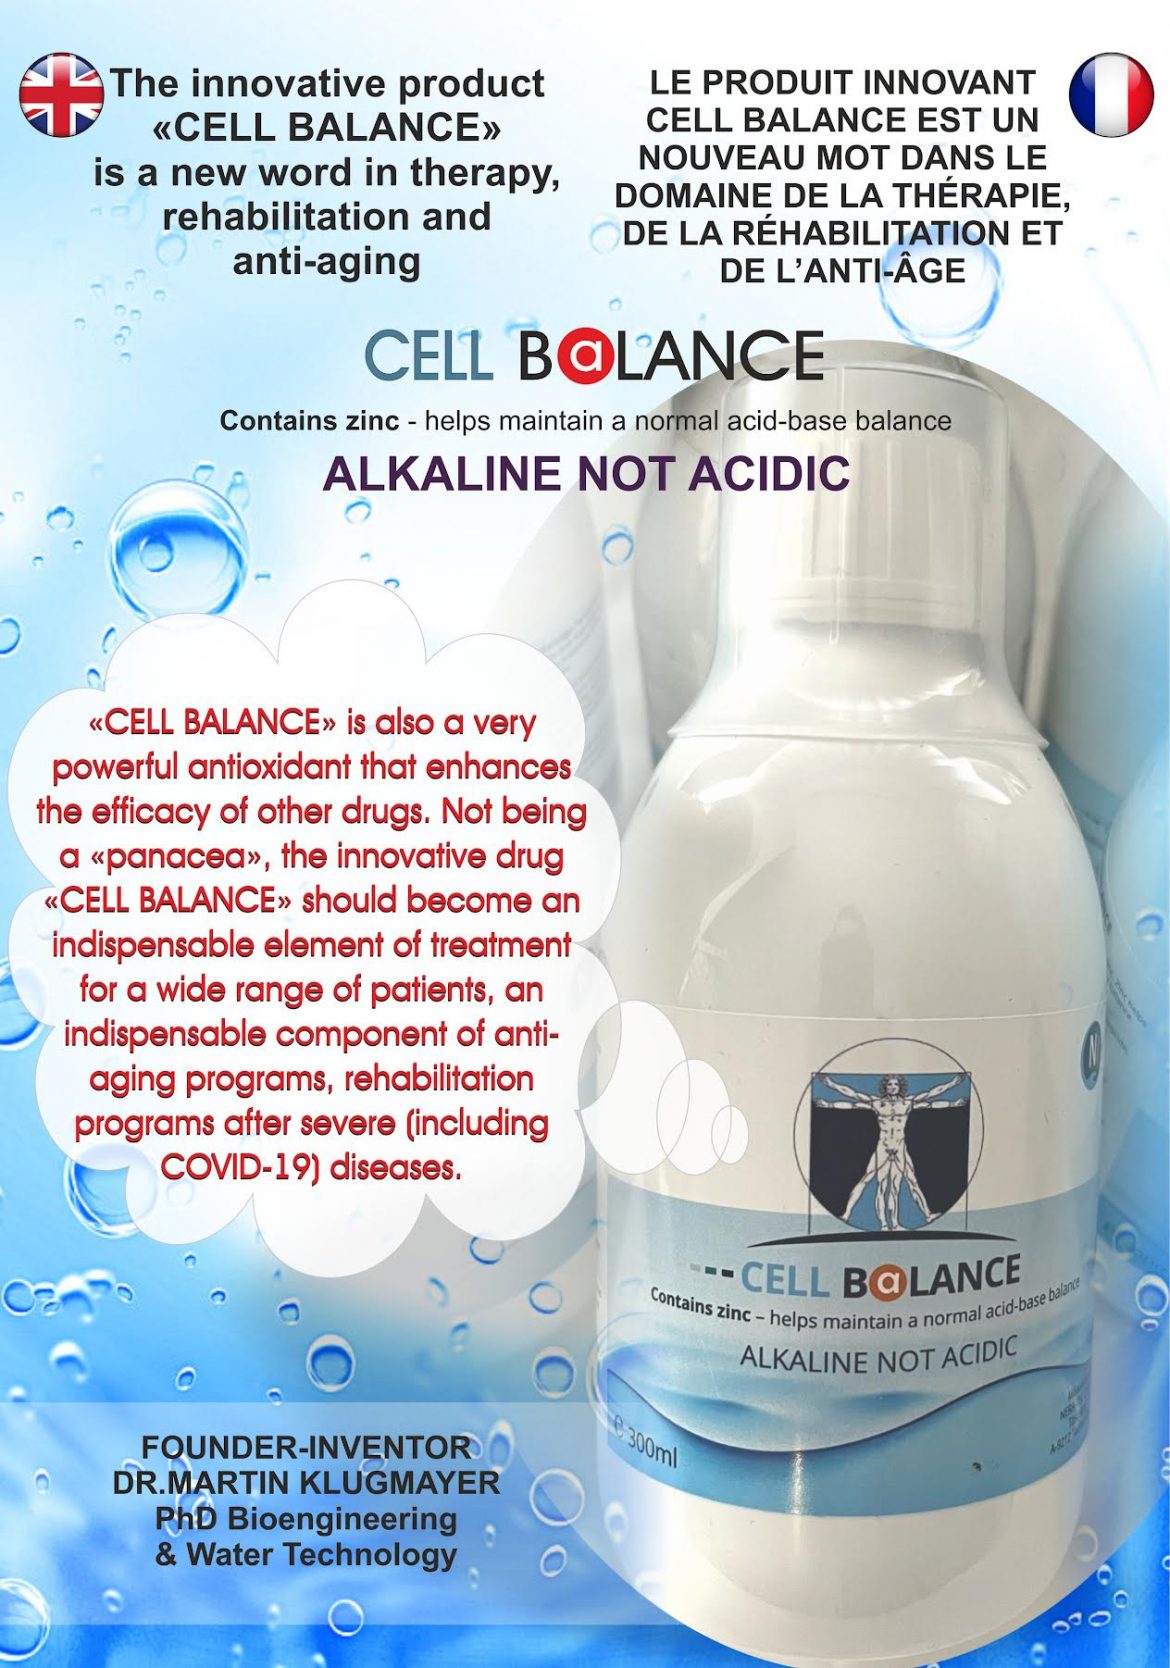 The innovative product “CELL BALANCE” is a new word in therapy, rehabilitation and anti-aging.